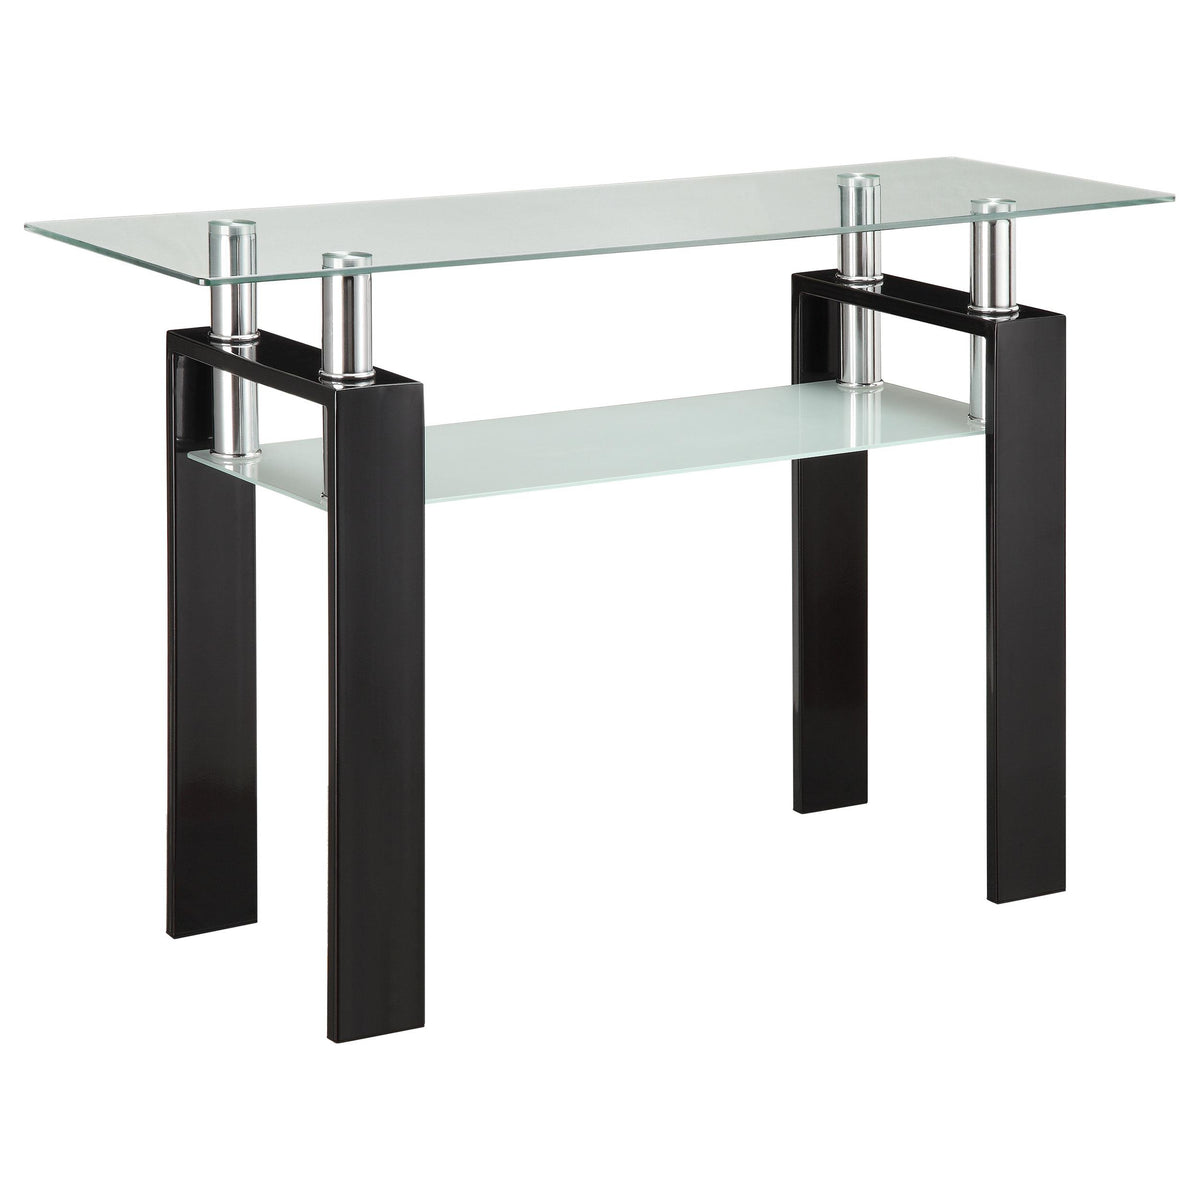 Dyer Tempered Glass Sofa Table with Shelf Black Dyer Tempered Glass Sofa Table with Shelf Black Half Price Furniture